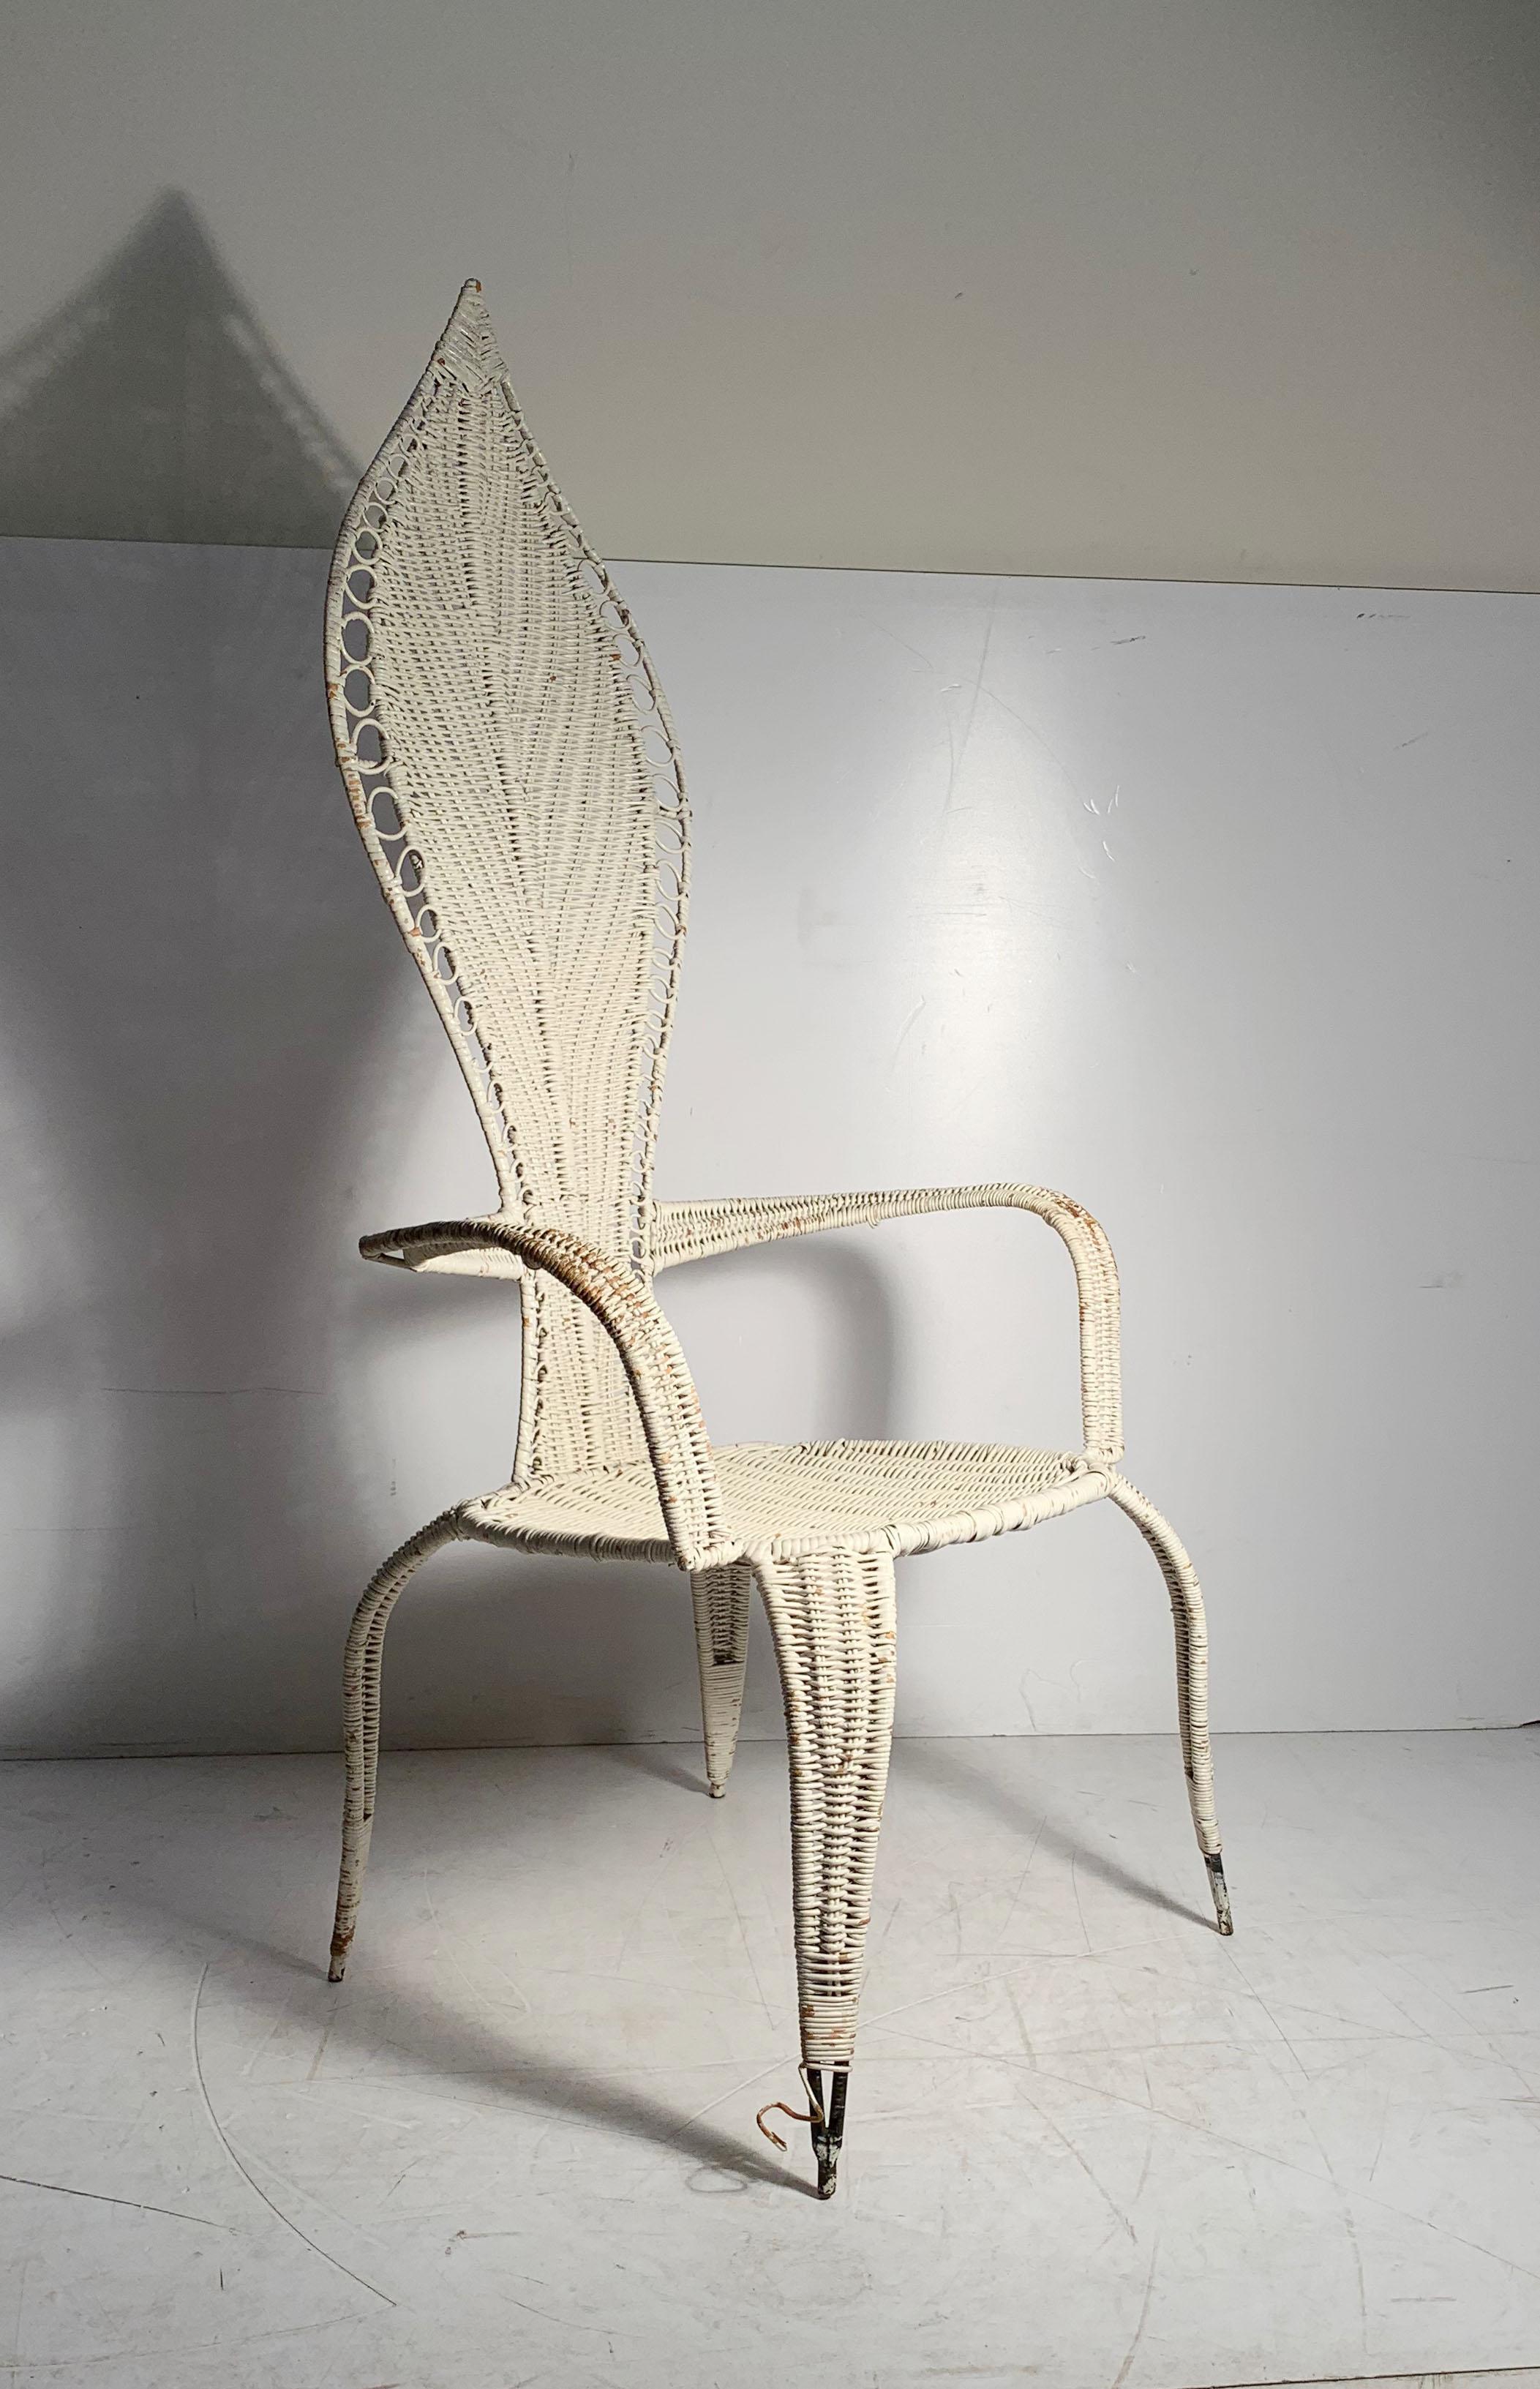 Tropi-Cal Danny Ho Fong and Miller Fong Mid-Century Modern Garden Patio Chair In Good Condition For Sale In Chicago, IL